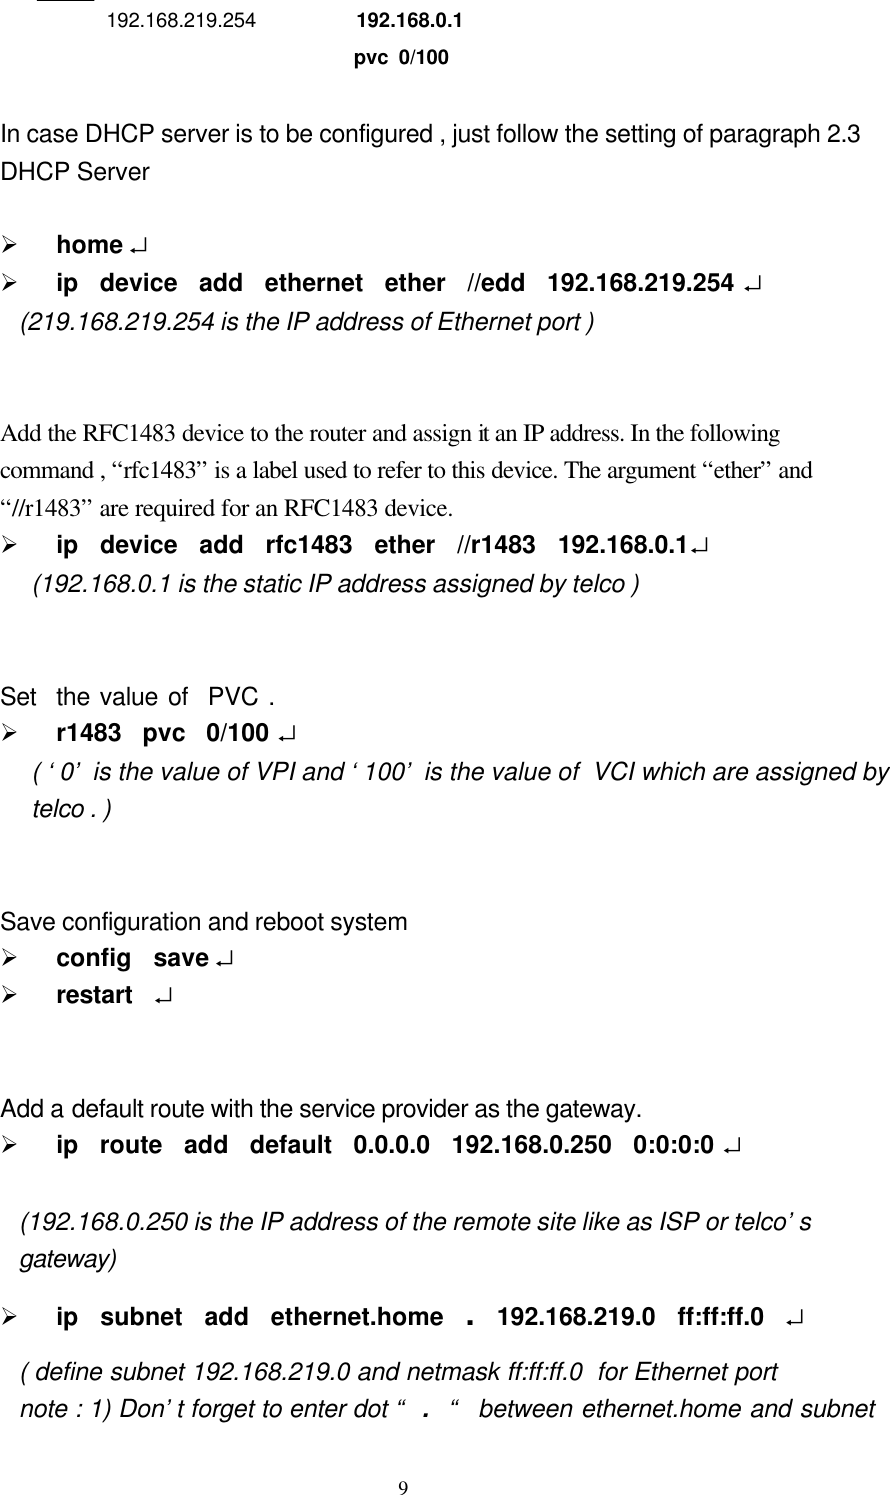  9    192.168.219.254  192.168.0.1                          pvc 0/100            In case DHCP server is to be configured , just follow the setting of paragraph 2.3   DHCP Server    Ø home ↵   Ø ip  device  add  ethernet  ether  //edd  192.168.219.254 ↵  (219.168.219.254 is the IP address of Ethernet port )   Add the RFC1483 device to the router and assign it an IP address. In the following   command , “rfc1483” is a label used to refer to this device. The argument “ether” and   “//r1483” are required for an RFC1483 device. Ø ip  device  add  rfc1483  ether  //r1483  192.168.0.1↵ (192.168.0.1 is the static IP address assigned by telco )      Set  the value of  PVC . Ø r1483  pvc  0/100 ↵  ( ‘0’ is the value of VPI and ‘100’ is the value of  VCI which are assigned by telco . )                    Save configuration and reboot system Ø config  save ↵   Ø restart   ↵   Add a default route with the service provider as the gateway. Ø ip  route  add  default  0.0.0.0  192.168.0.250  0:0:0:0 ↵  (192.168.0.250 is the IP address of the remote site like as ISP or telco’s gateway) Ø ip  subnet  add  ethernet.home  .  192.168.219.0  ff:ff:ff.0  ↵ ( define subnet 192.168.219.0 and netmask ff:ff:ff.0  for Ethernet port note : 1) Don’t forget to enter dot “  .   “  between ethernet.home and subnet 